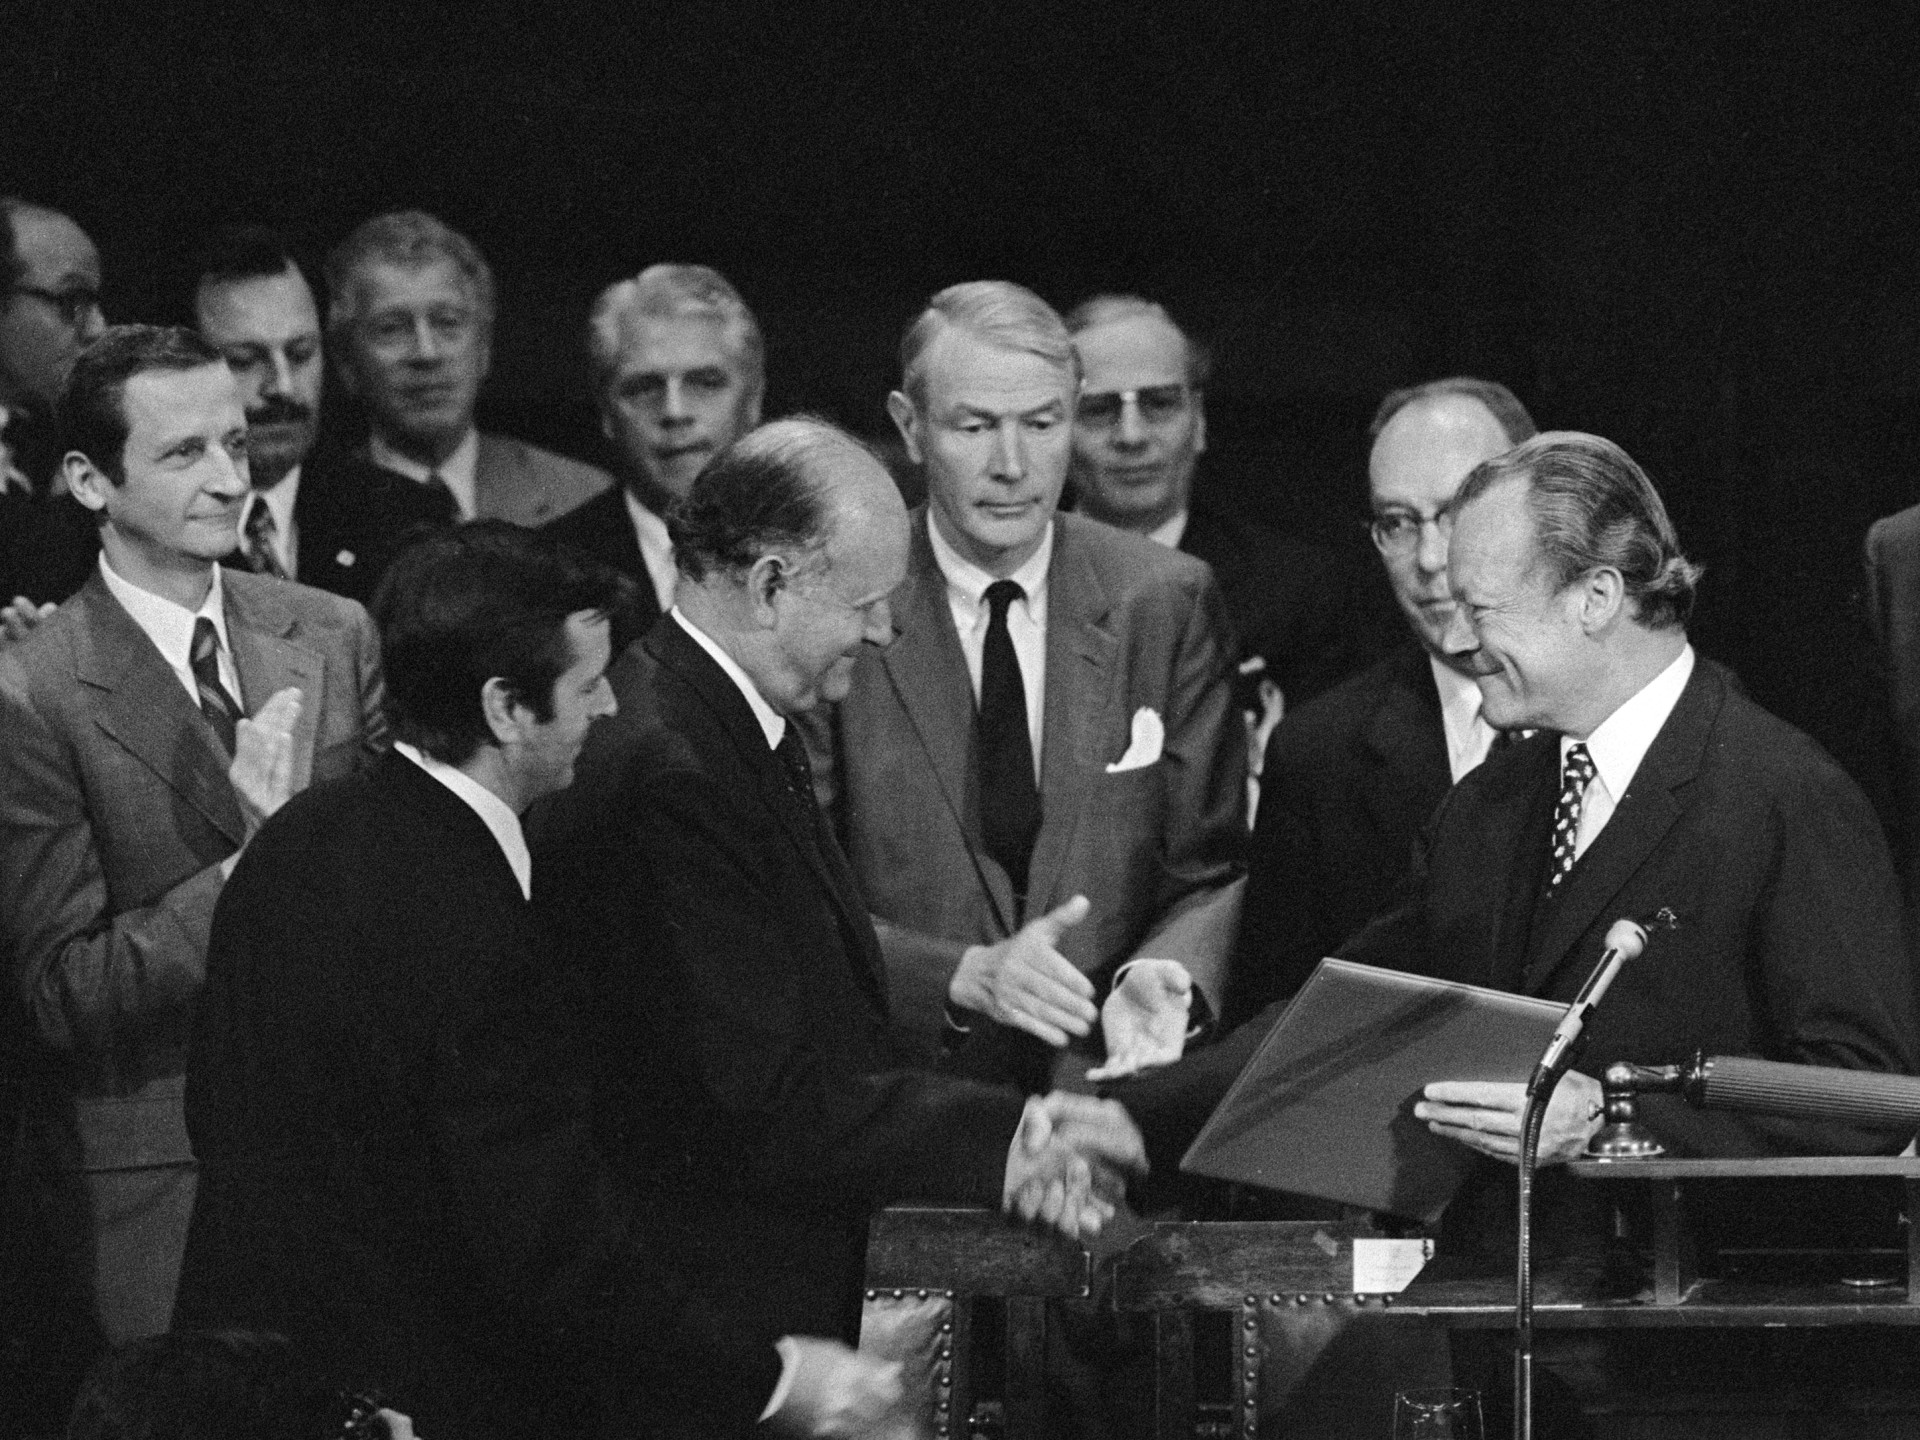 Federal Chancellor Willy Brandt after a speech at Harvard hands over the Federal Government's gift to the USA